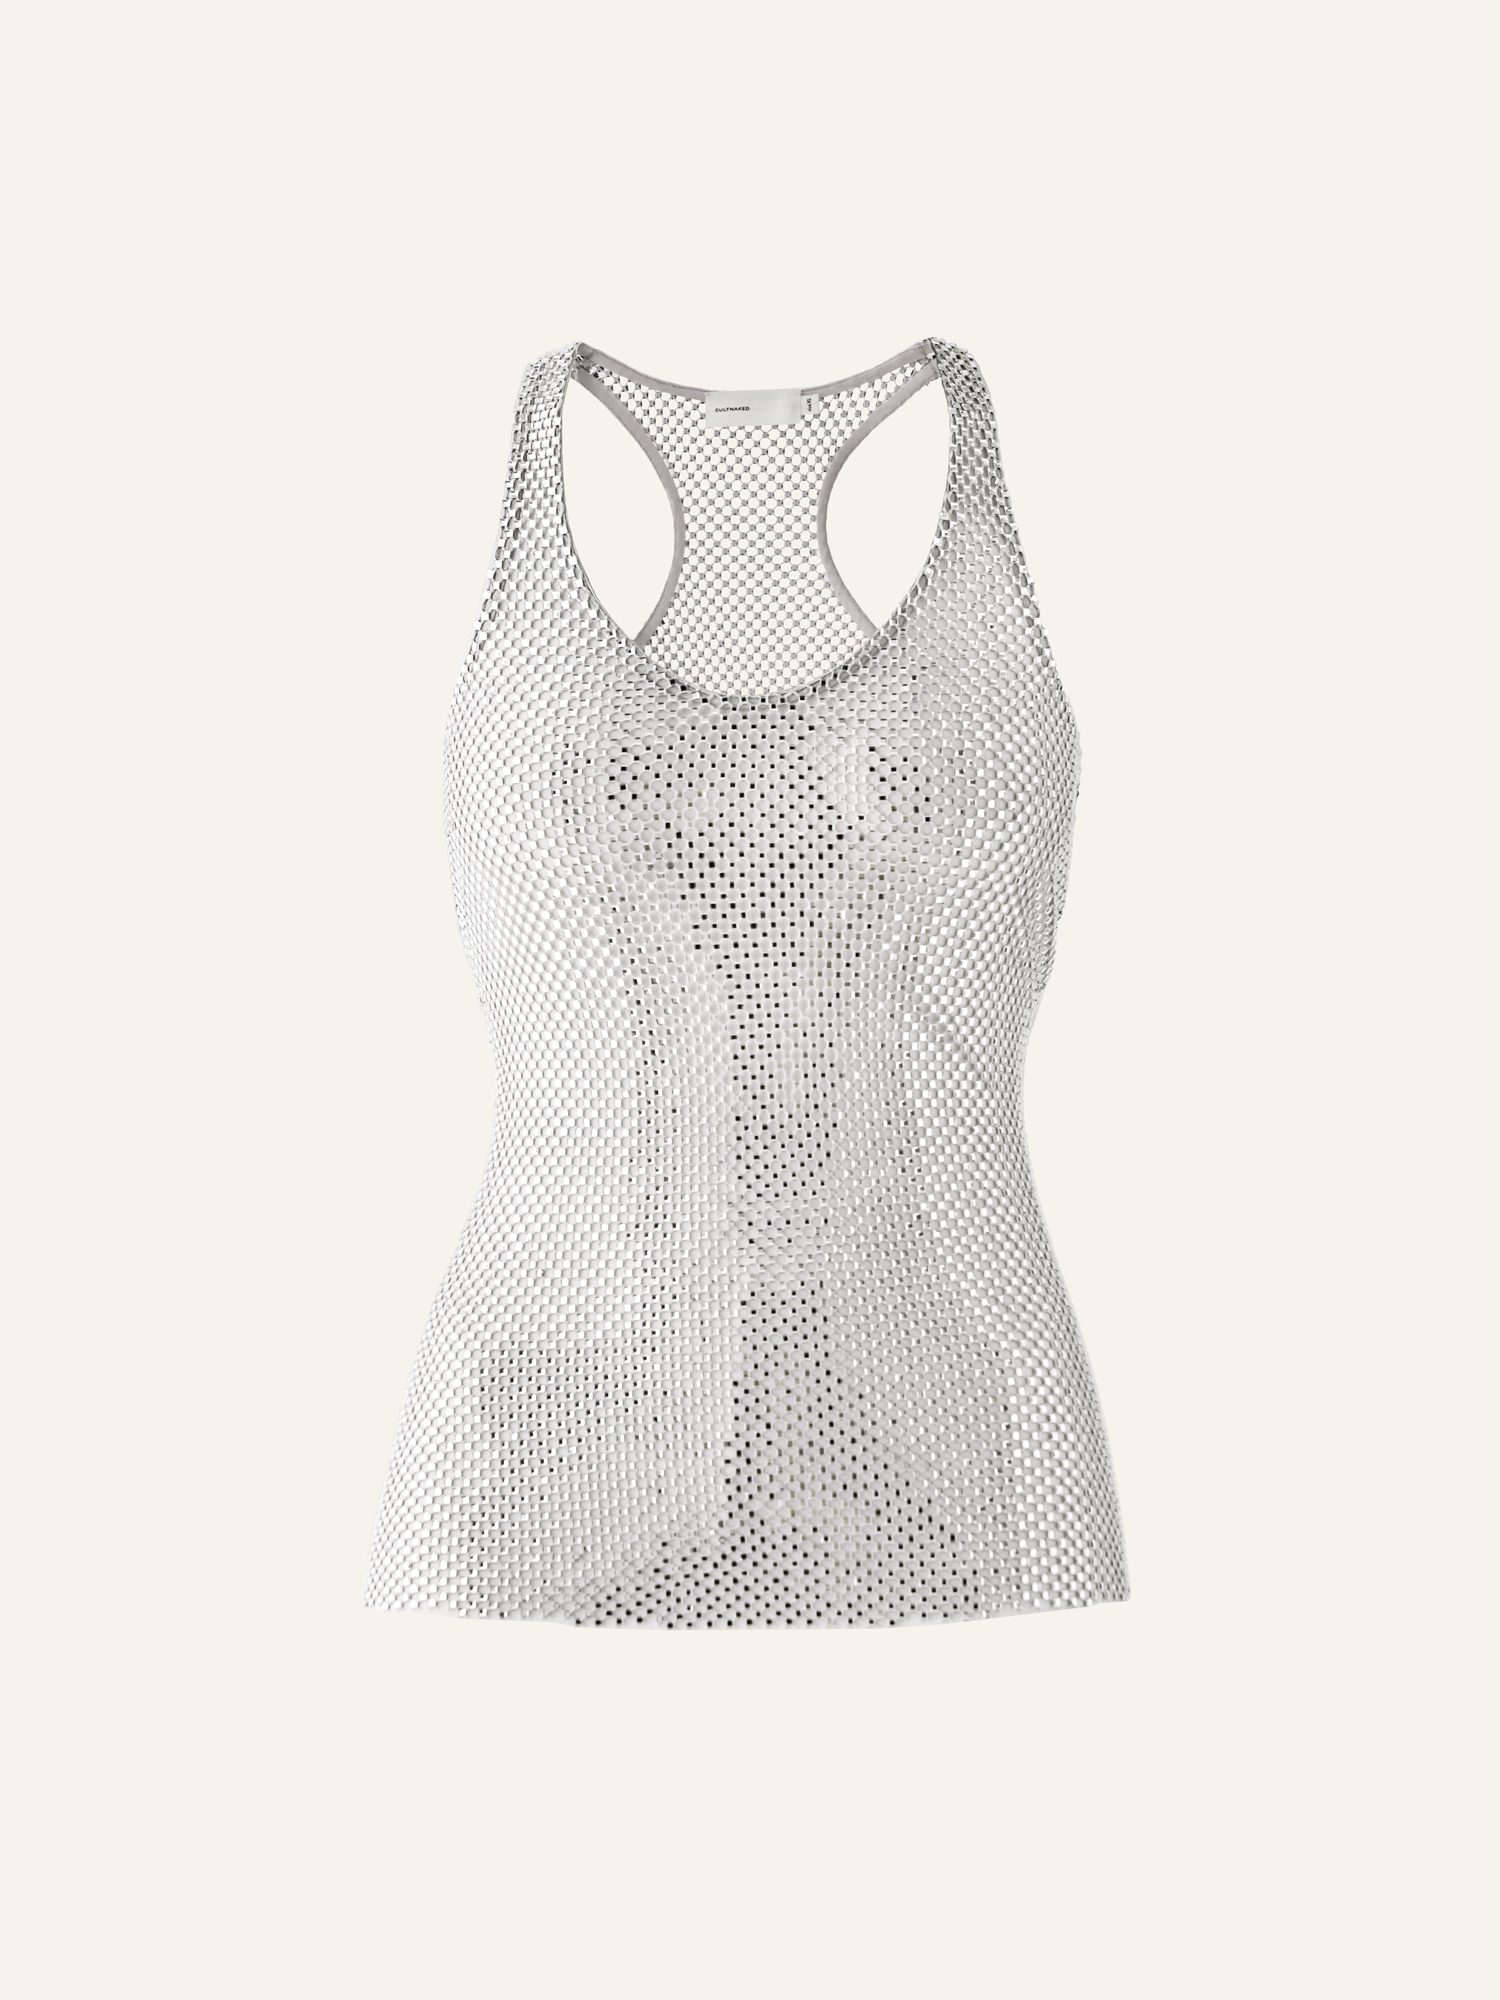 Product photo of a grey net tank top decorated with rhinestones